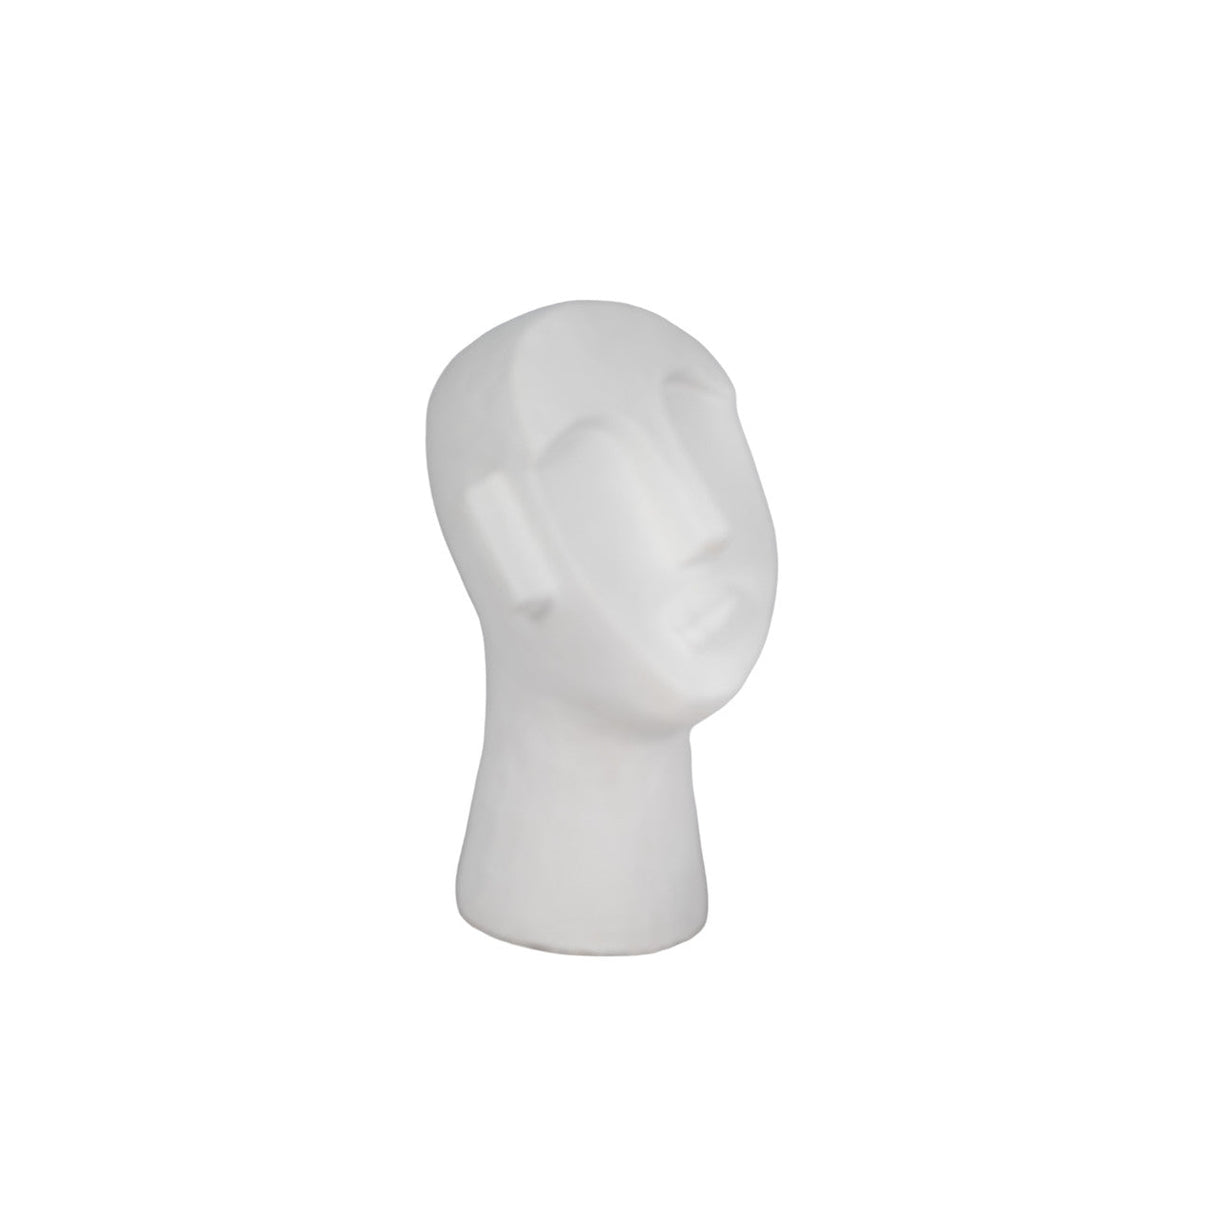 12" Looking Up Face Sculpture, White